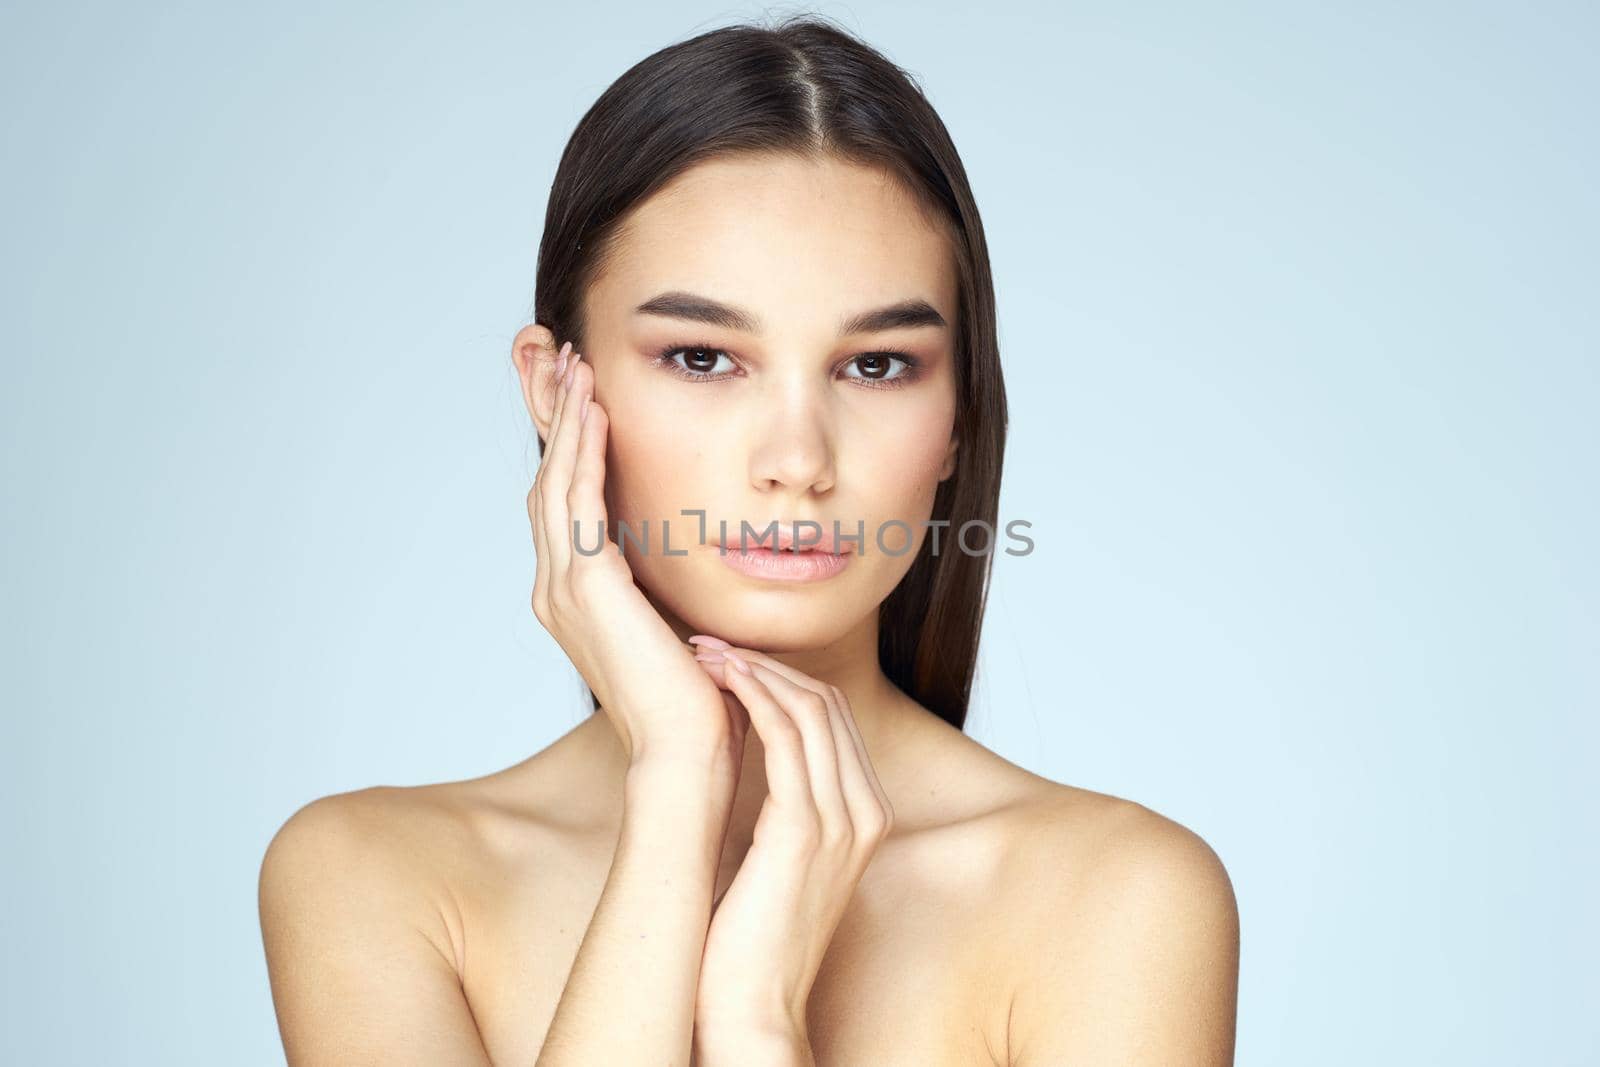 Woman with naked shoulders long hair clean skin cropped view blue background. High quality photo